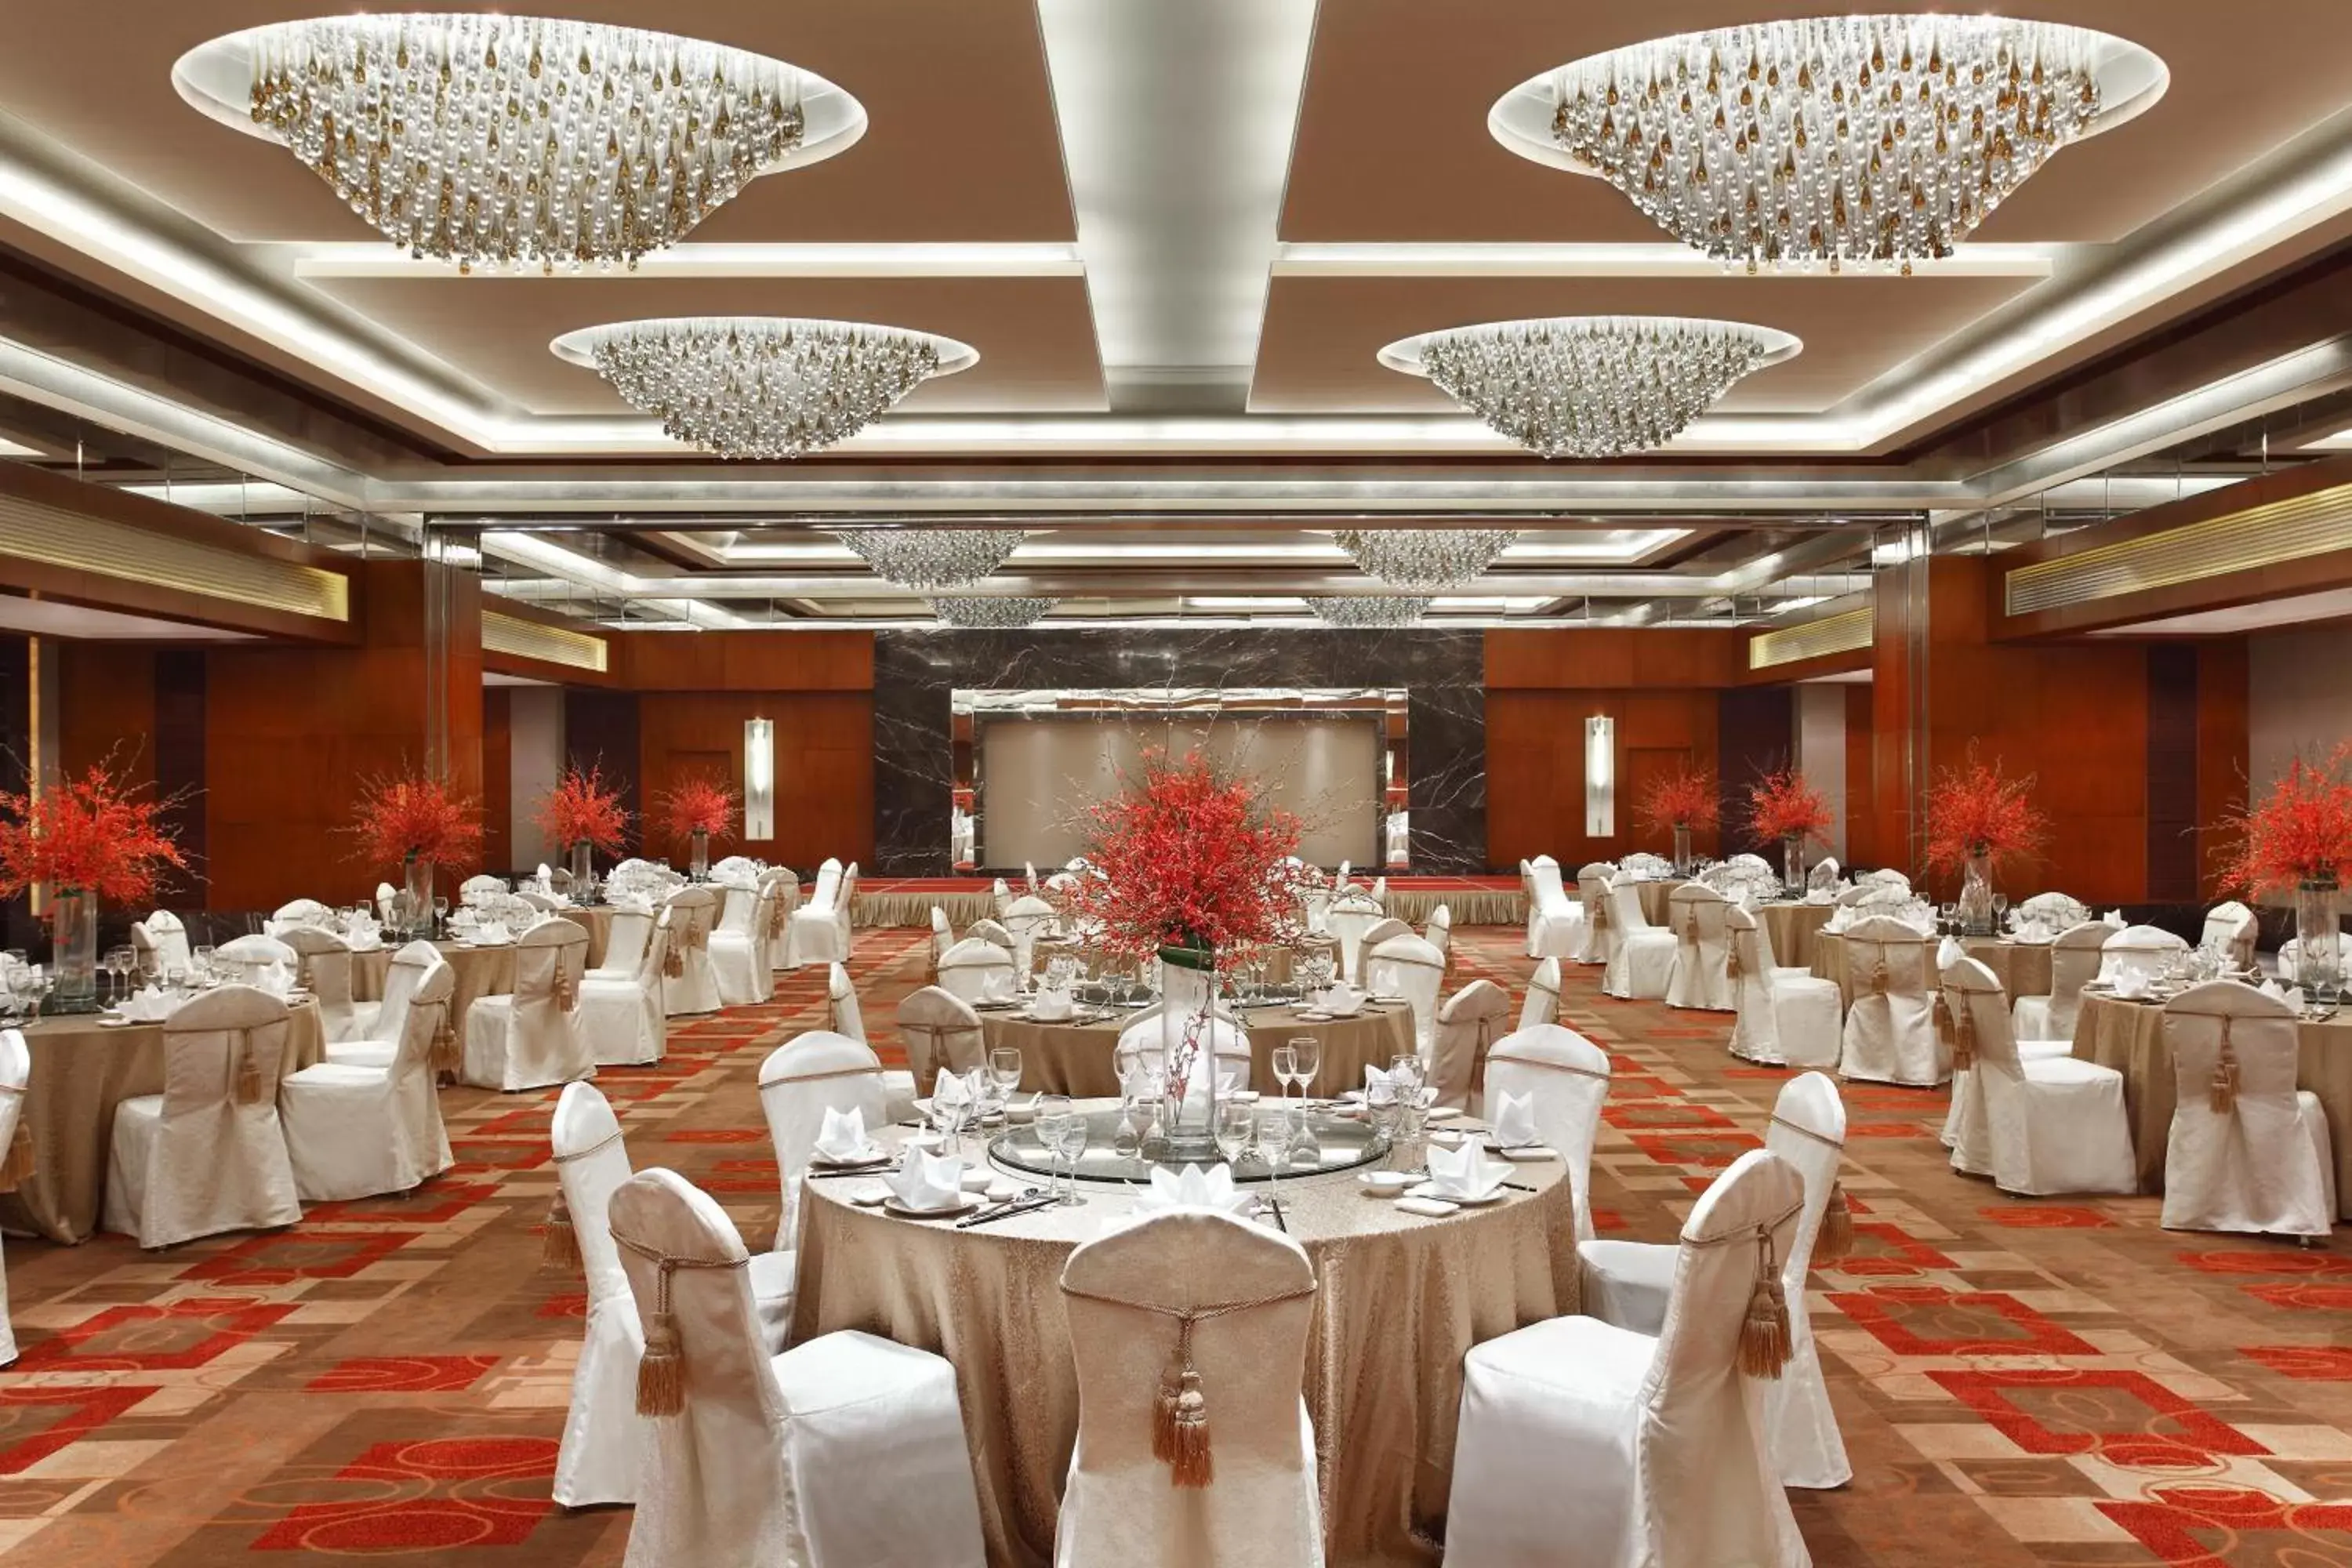 Banquet/Function facilities, Banquet Facilities in Sheraton Wenzhou Hotel